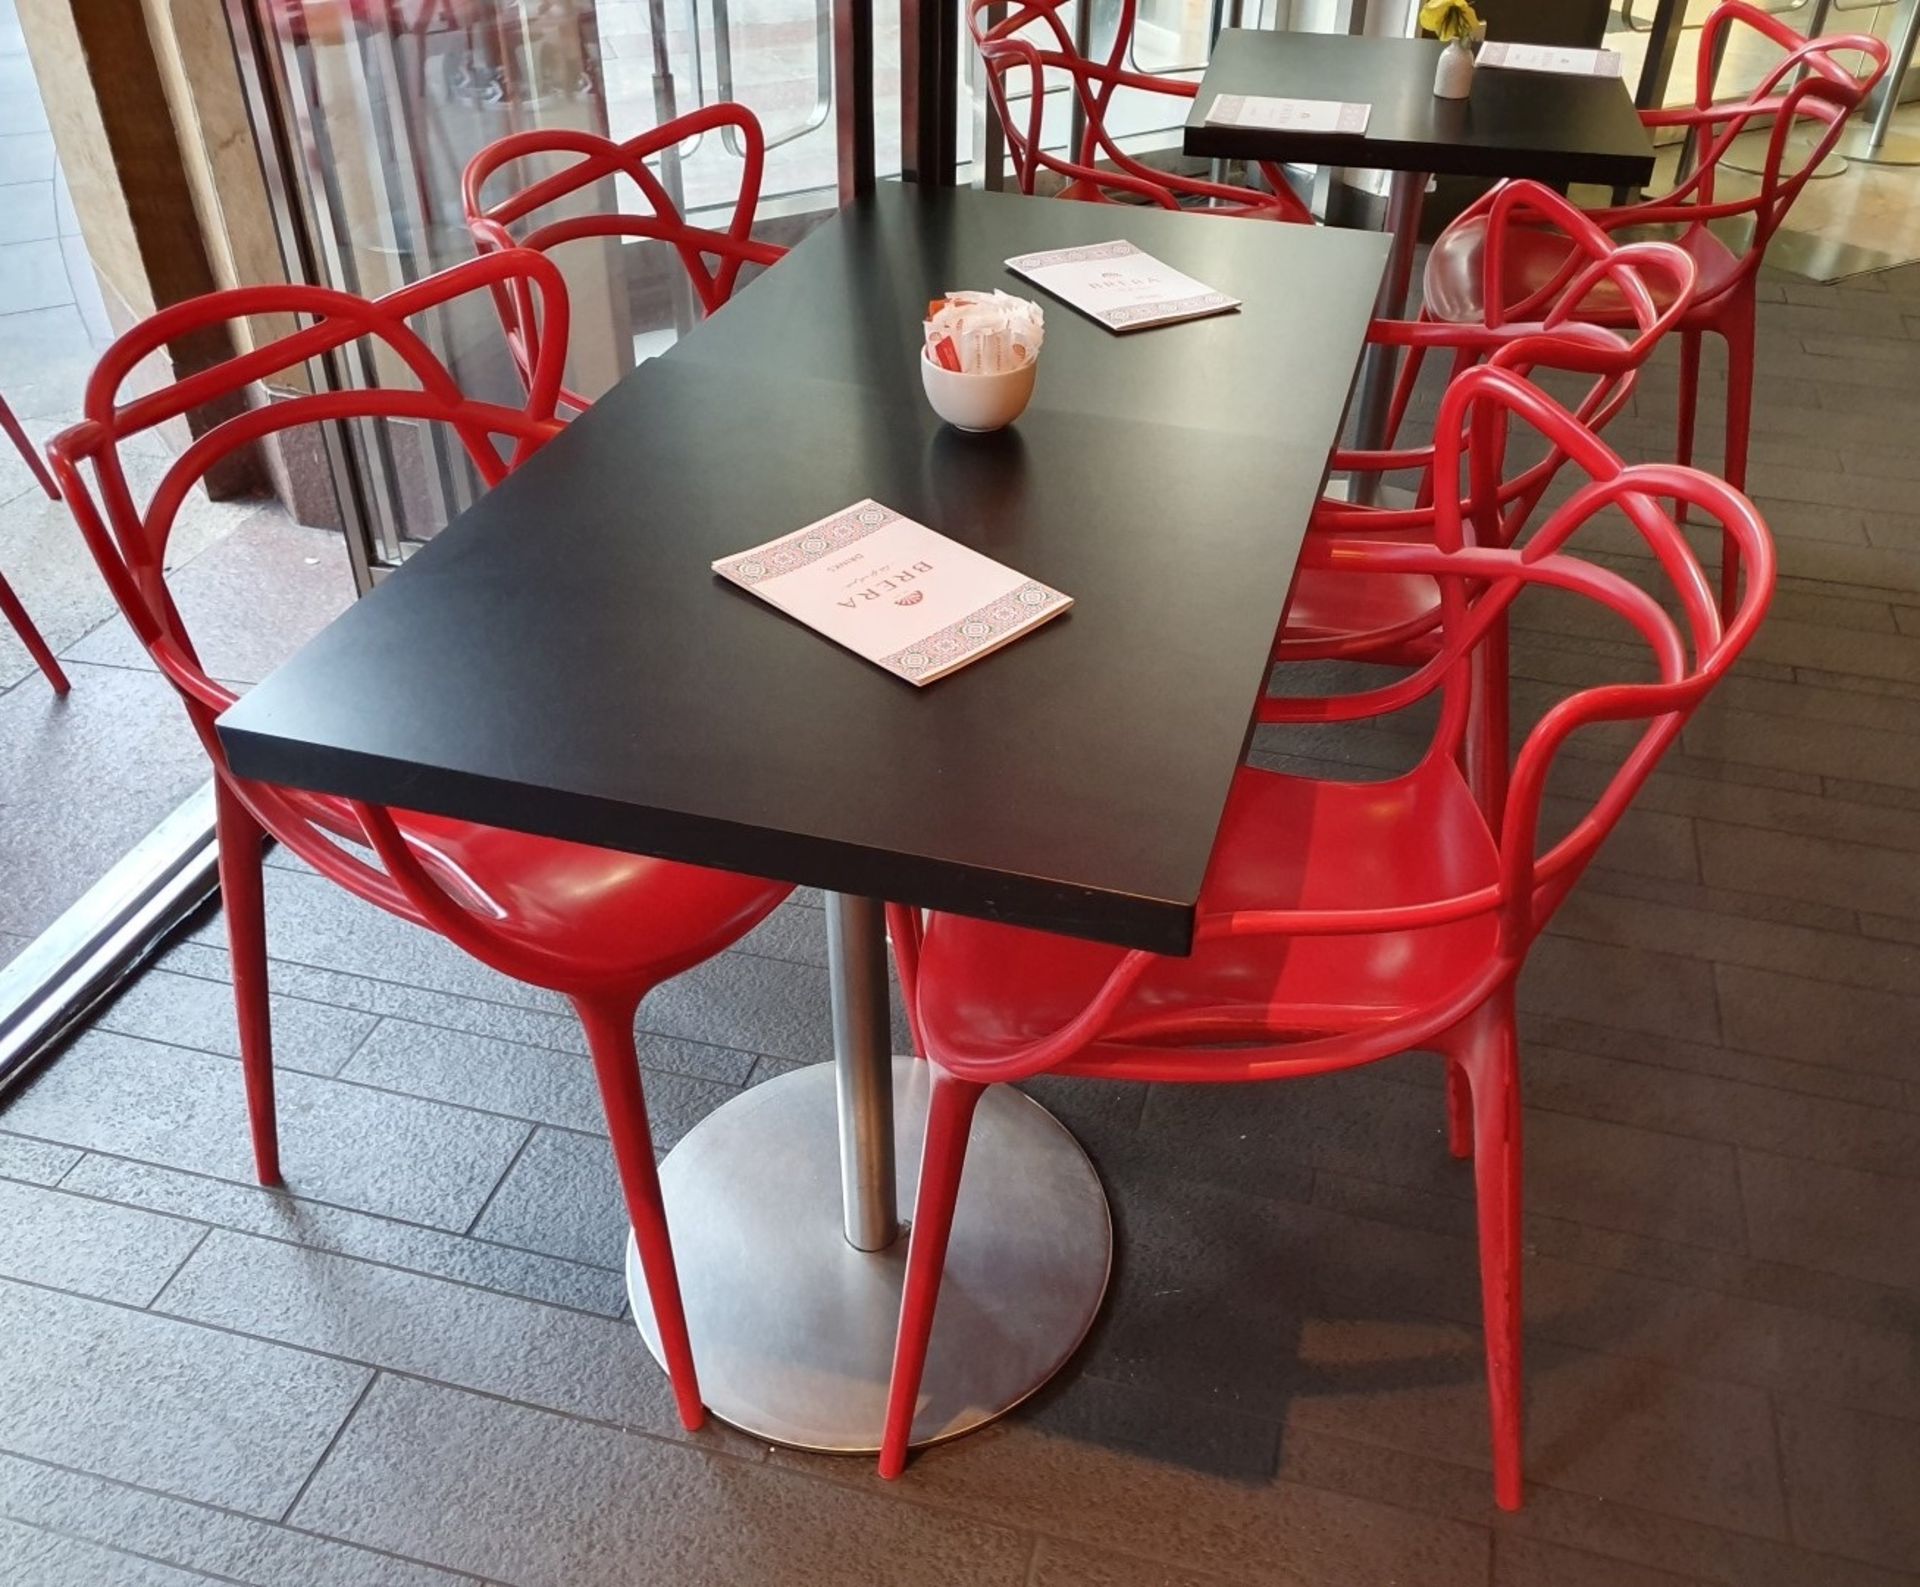 4 x Square Black Indoor Cafe Tables with Chrome Bases - Dimensions: 60 x 60 x Height 74cm - Ref: